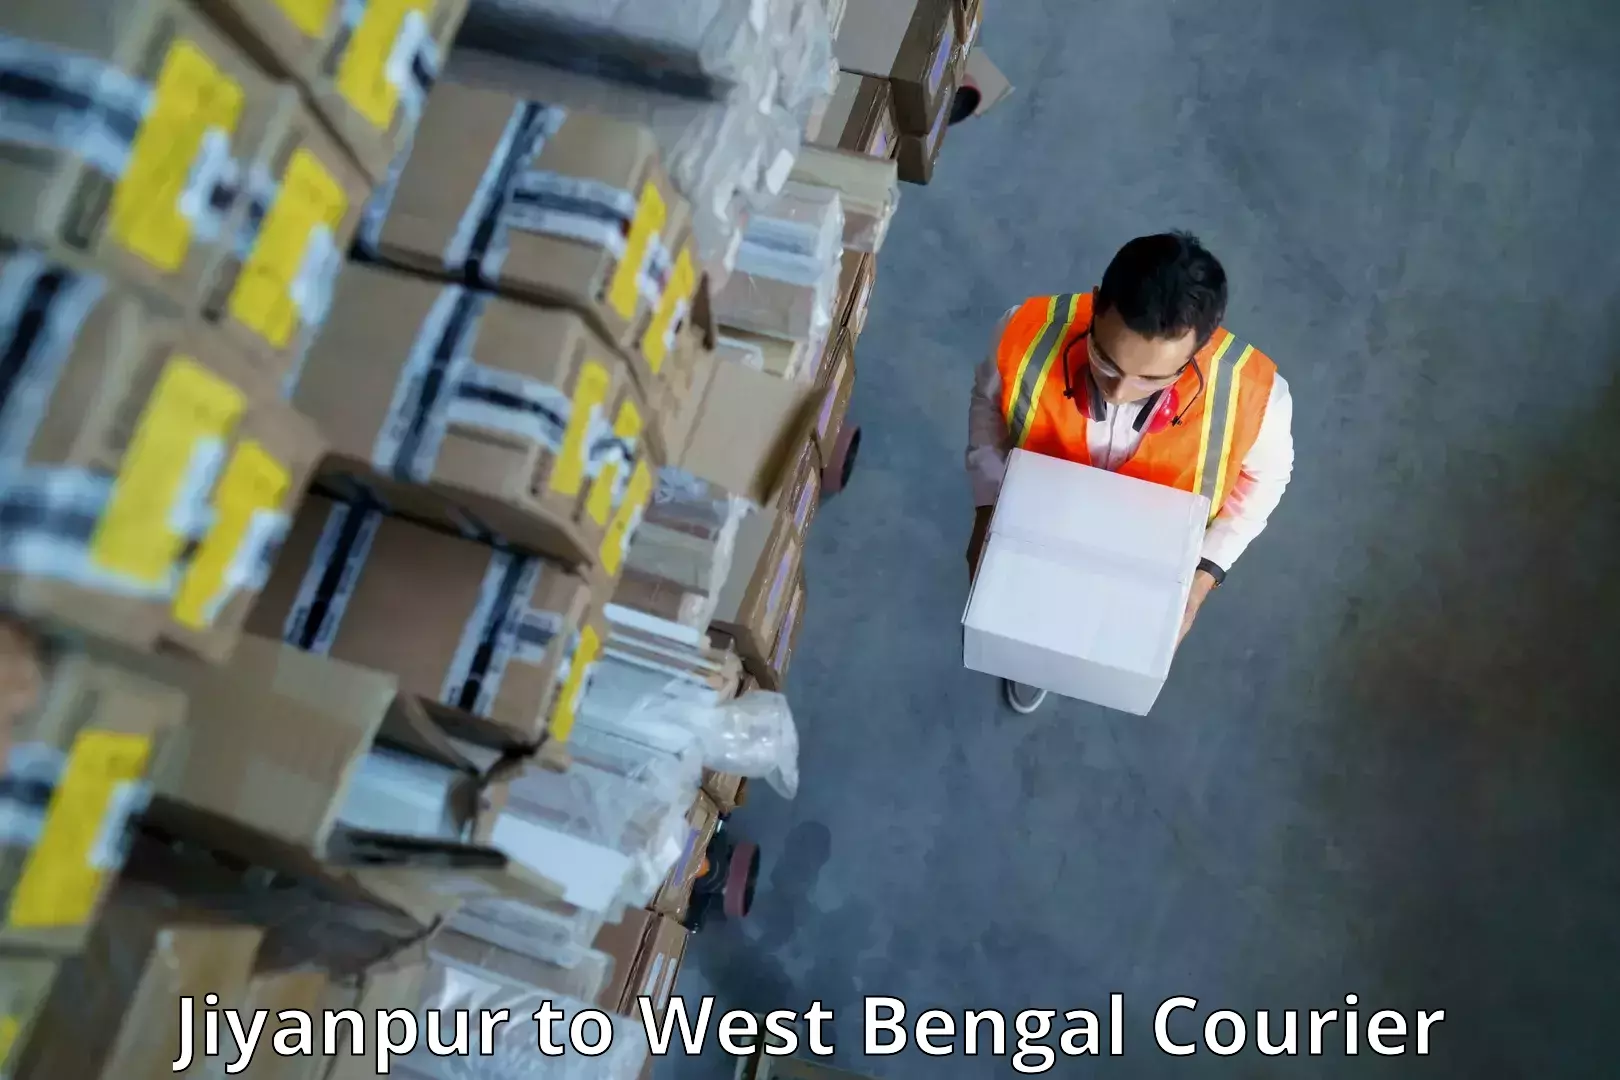 Courier service comparison in Jiyanpur to Beleghata